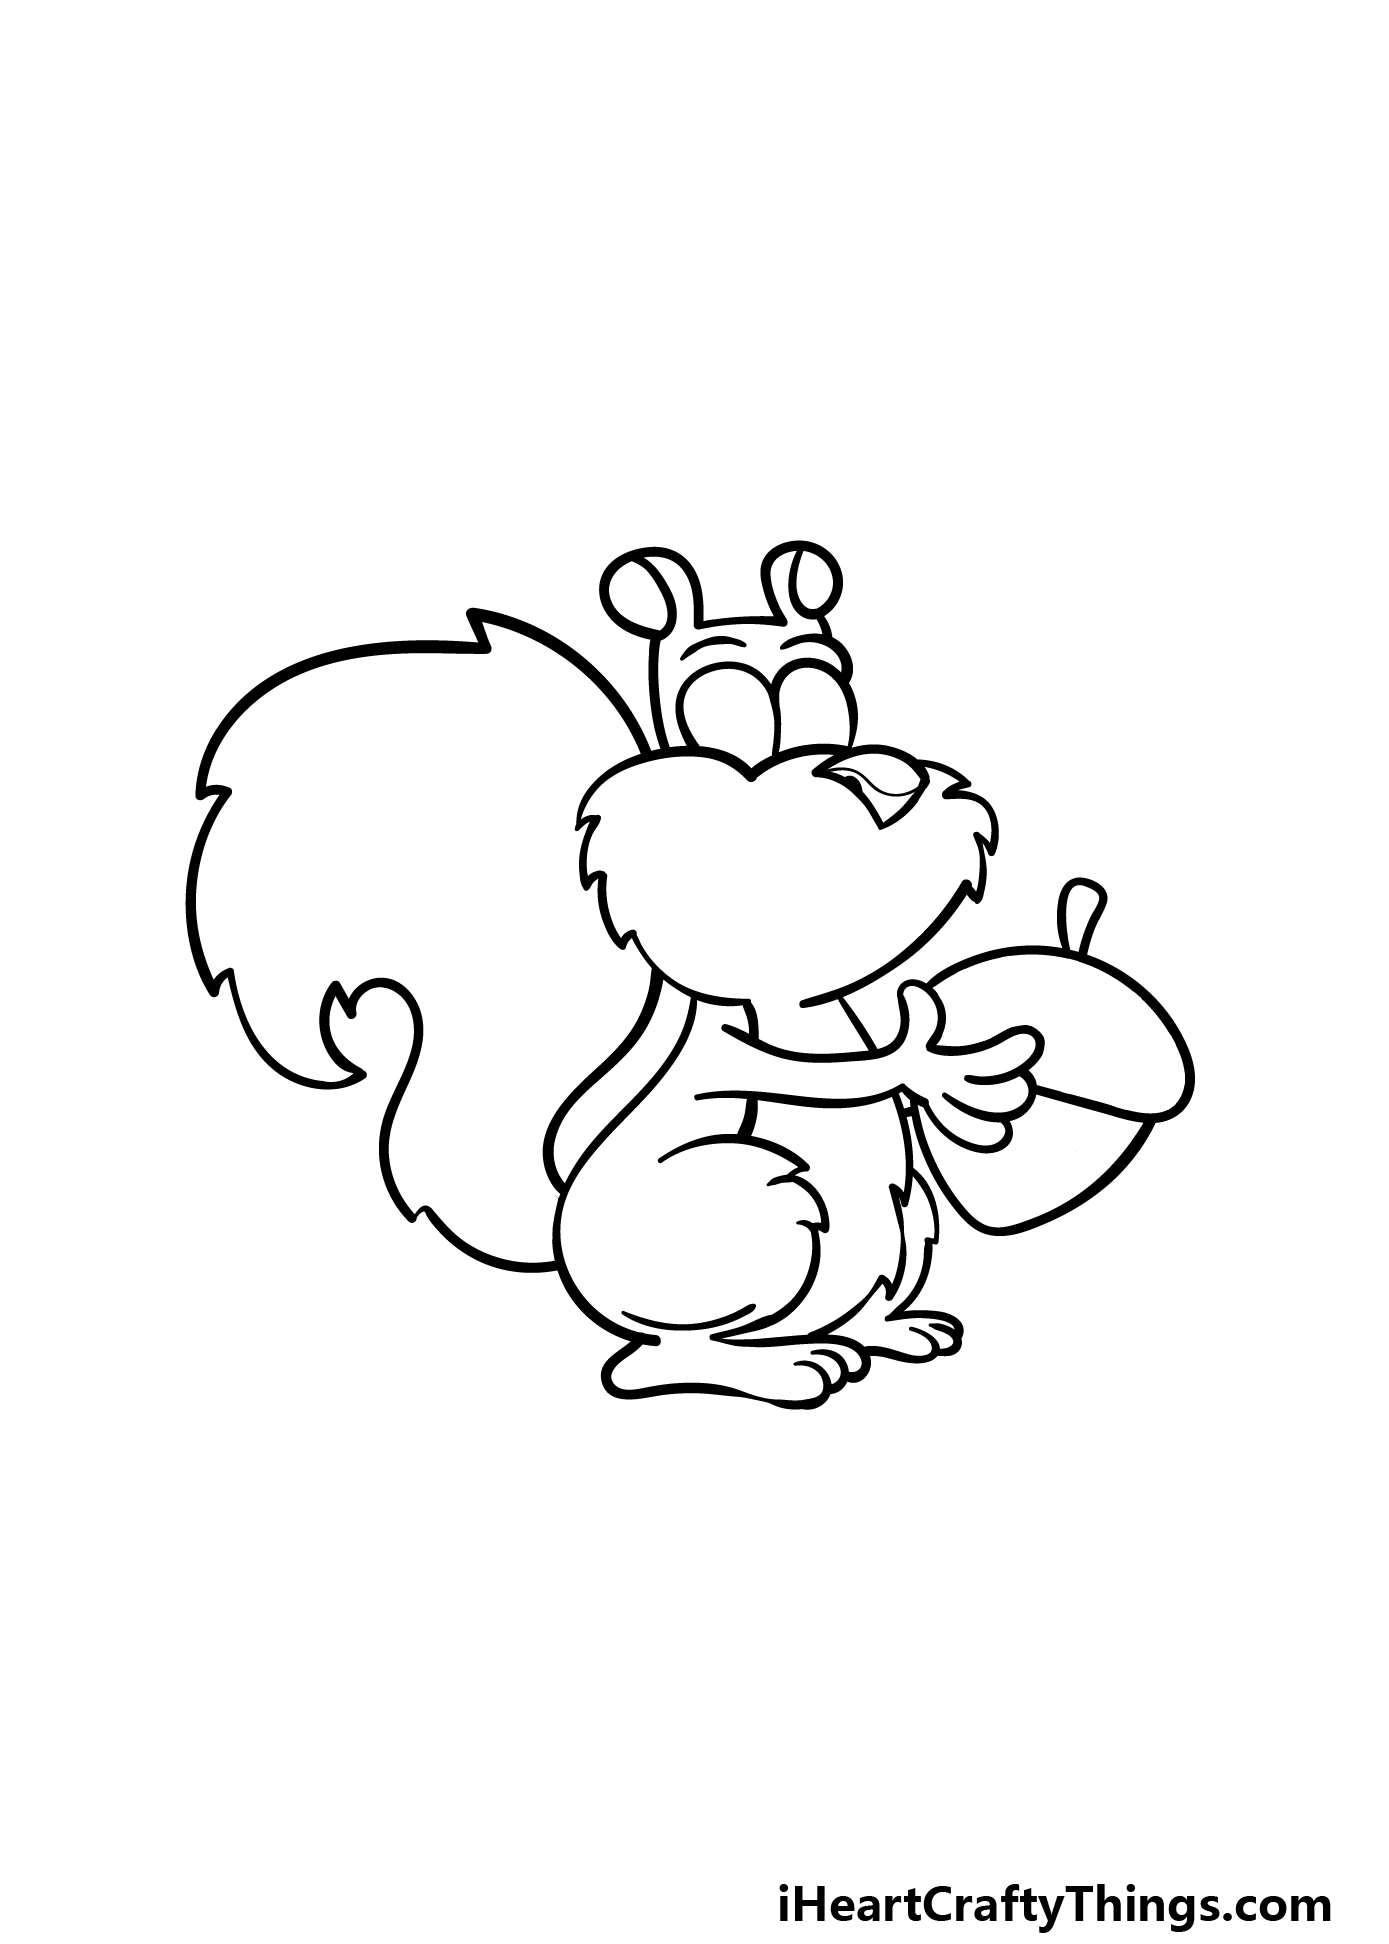 how to draw a cartoon squirrel step 3